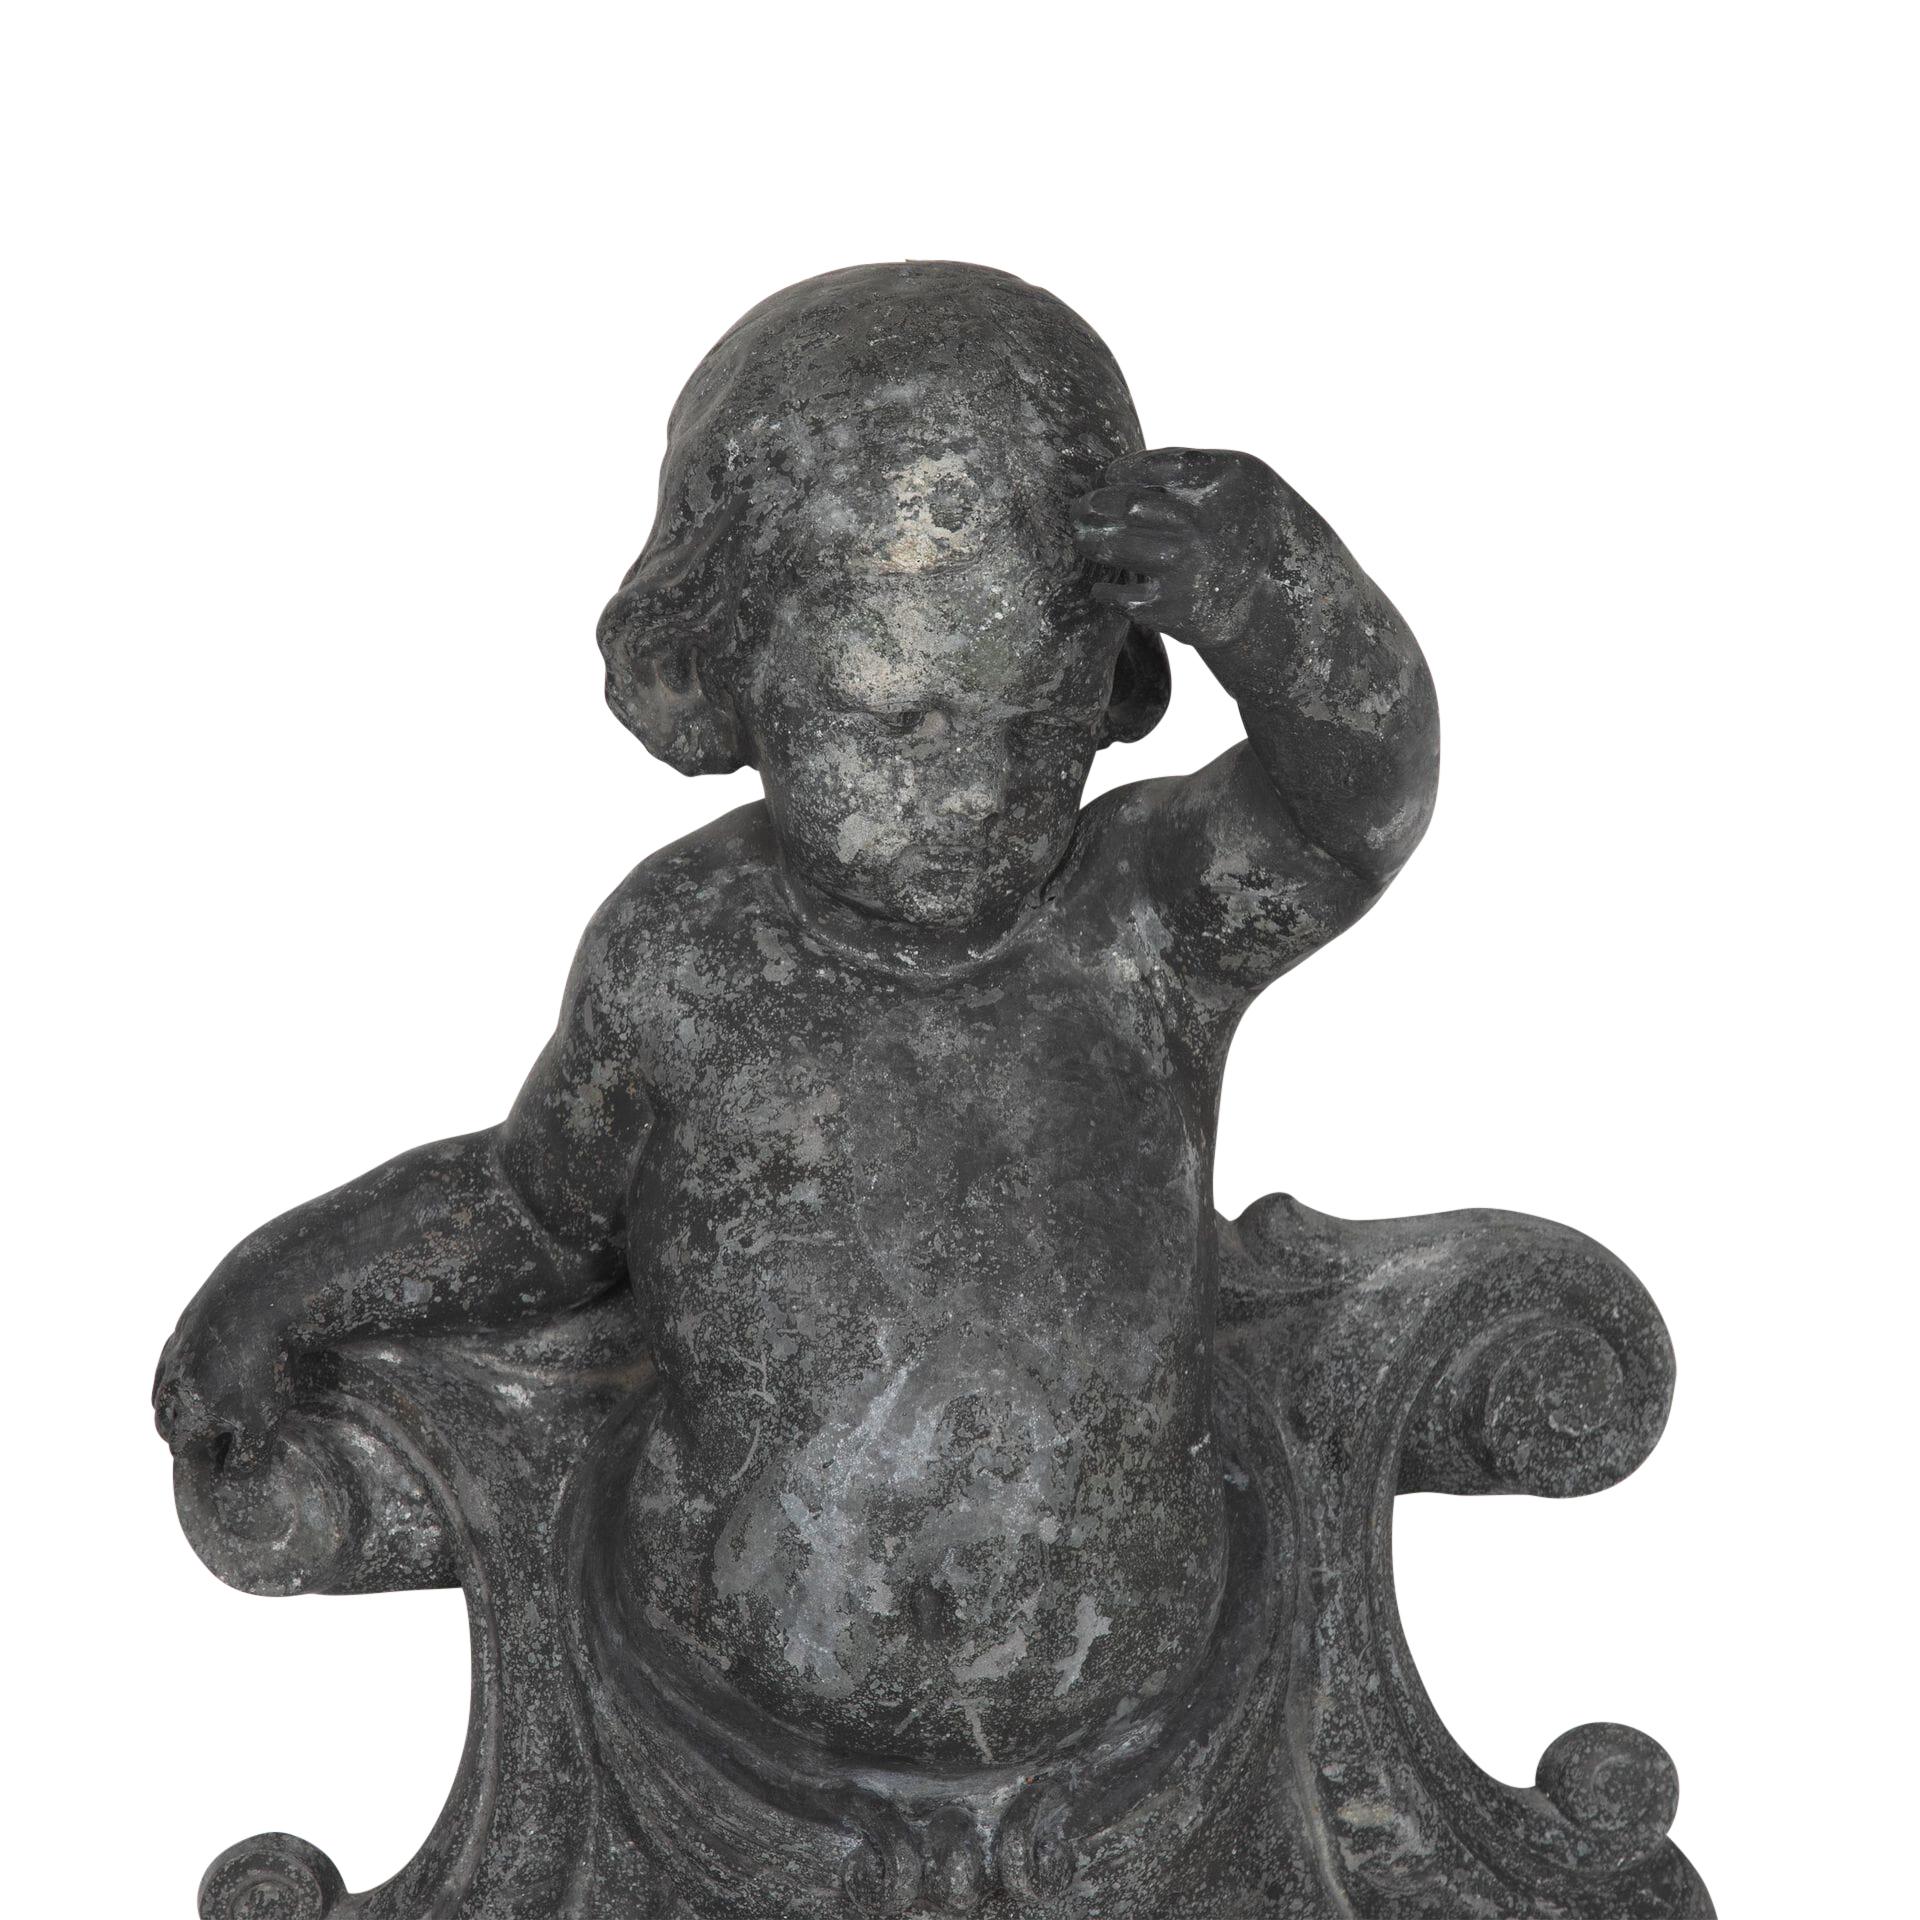 Magnificent pair of 19th Century putti made from cast alloy.
Correct pair in left and right arms.